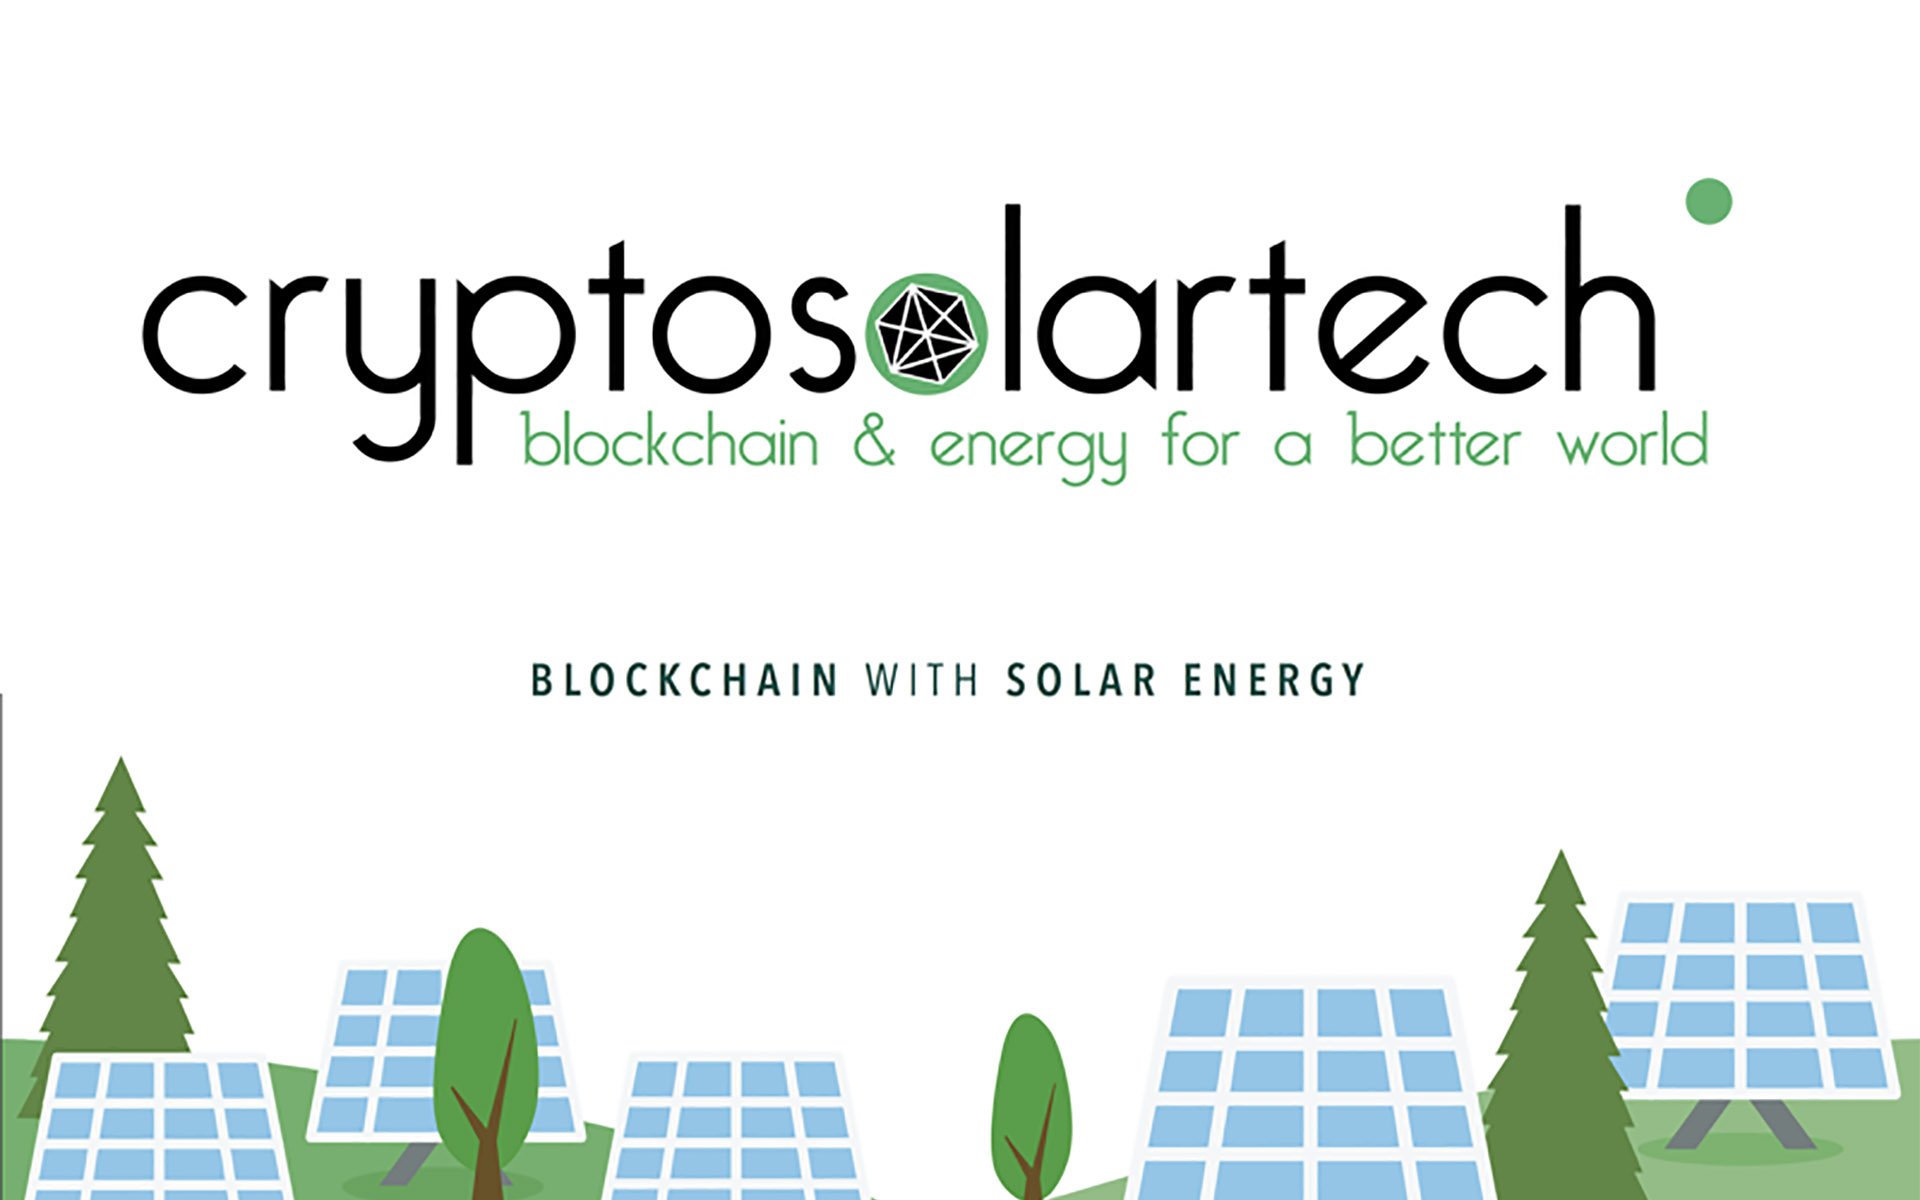 CryptoSolarTech Finishes Successful Pre-ICO with the Goal of Making Cryptocurrency Mining Energy-Efficient Like Never Before